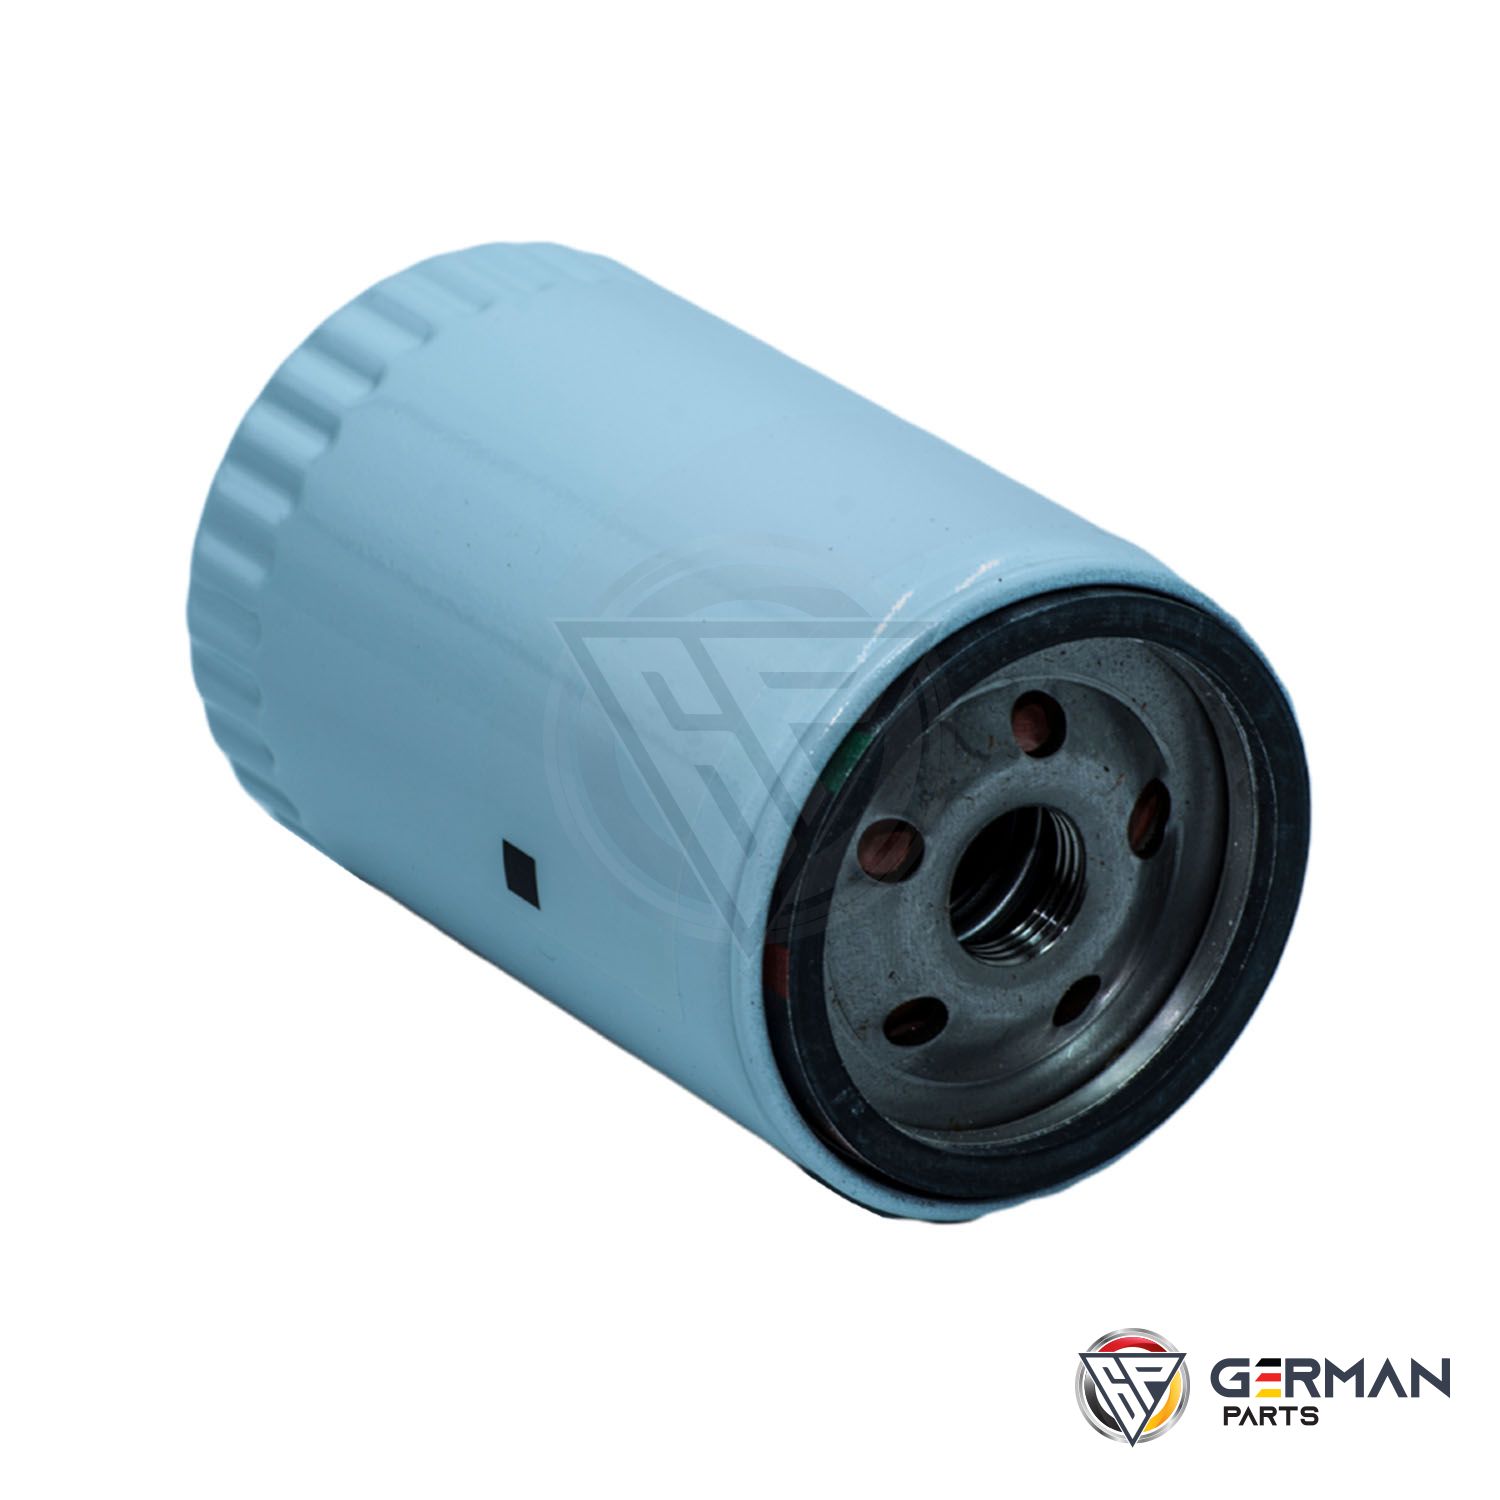 Buy Land Rover Oil Filter 4454116 - German Parts